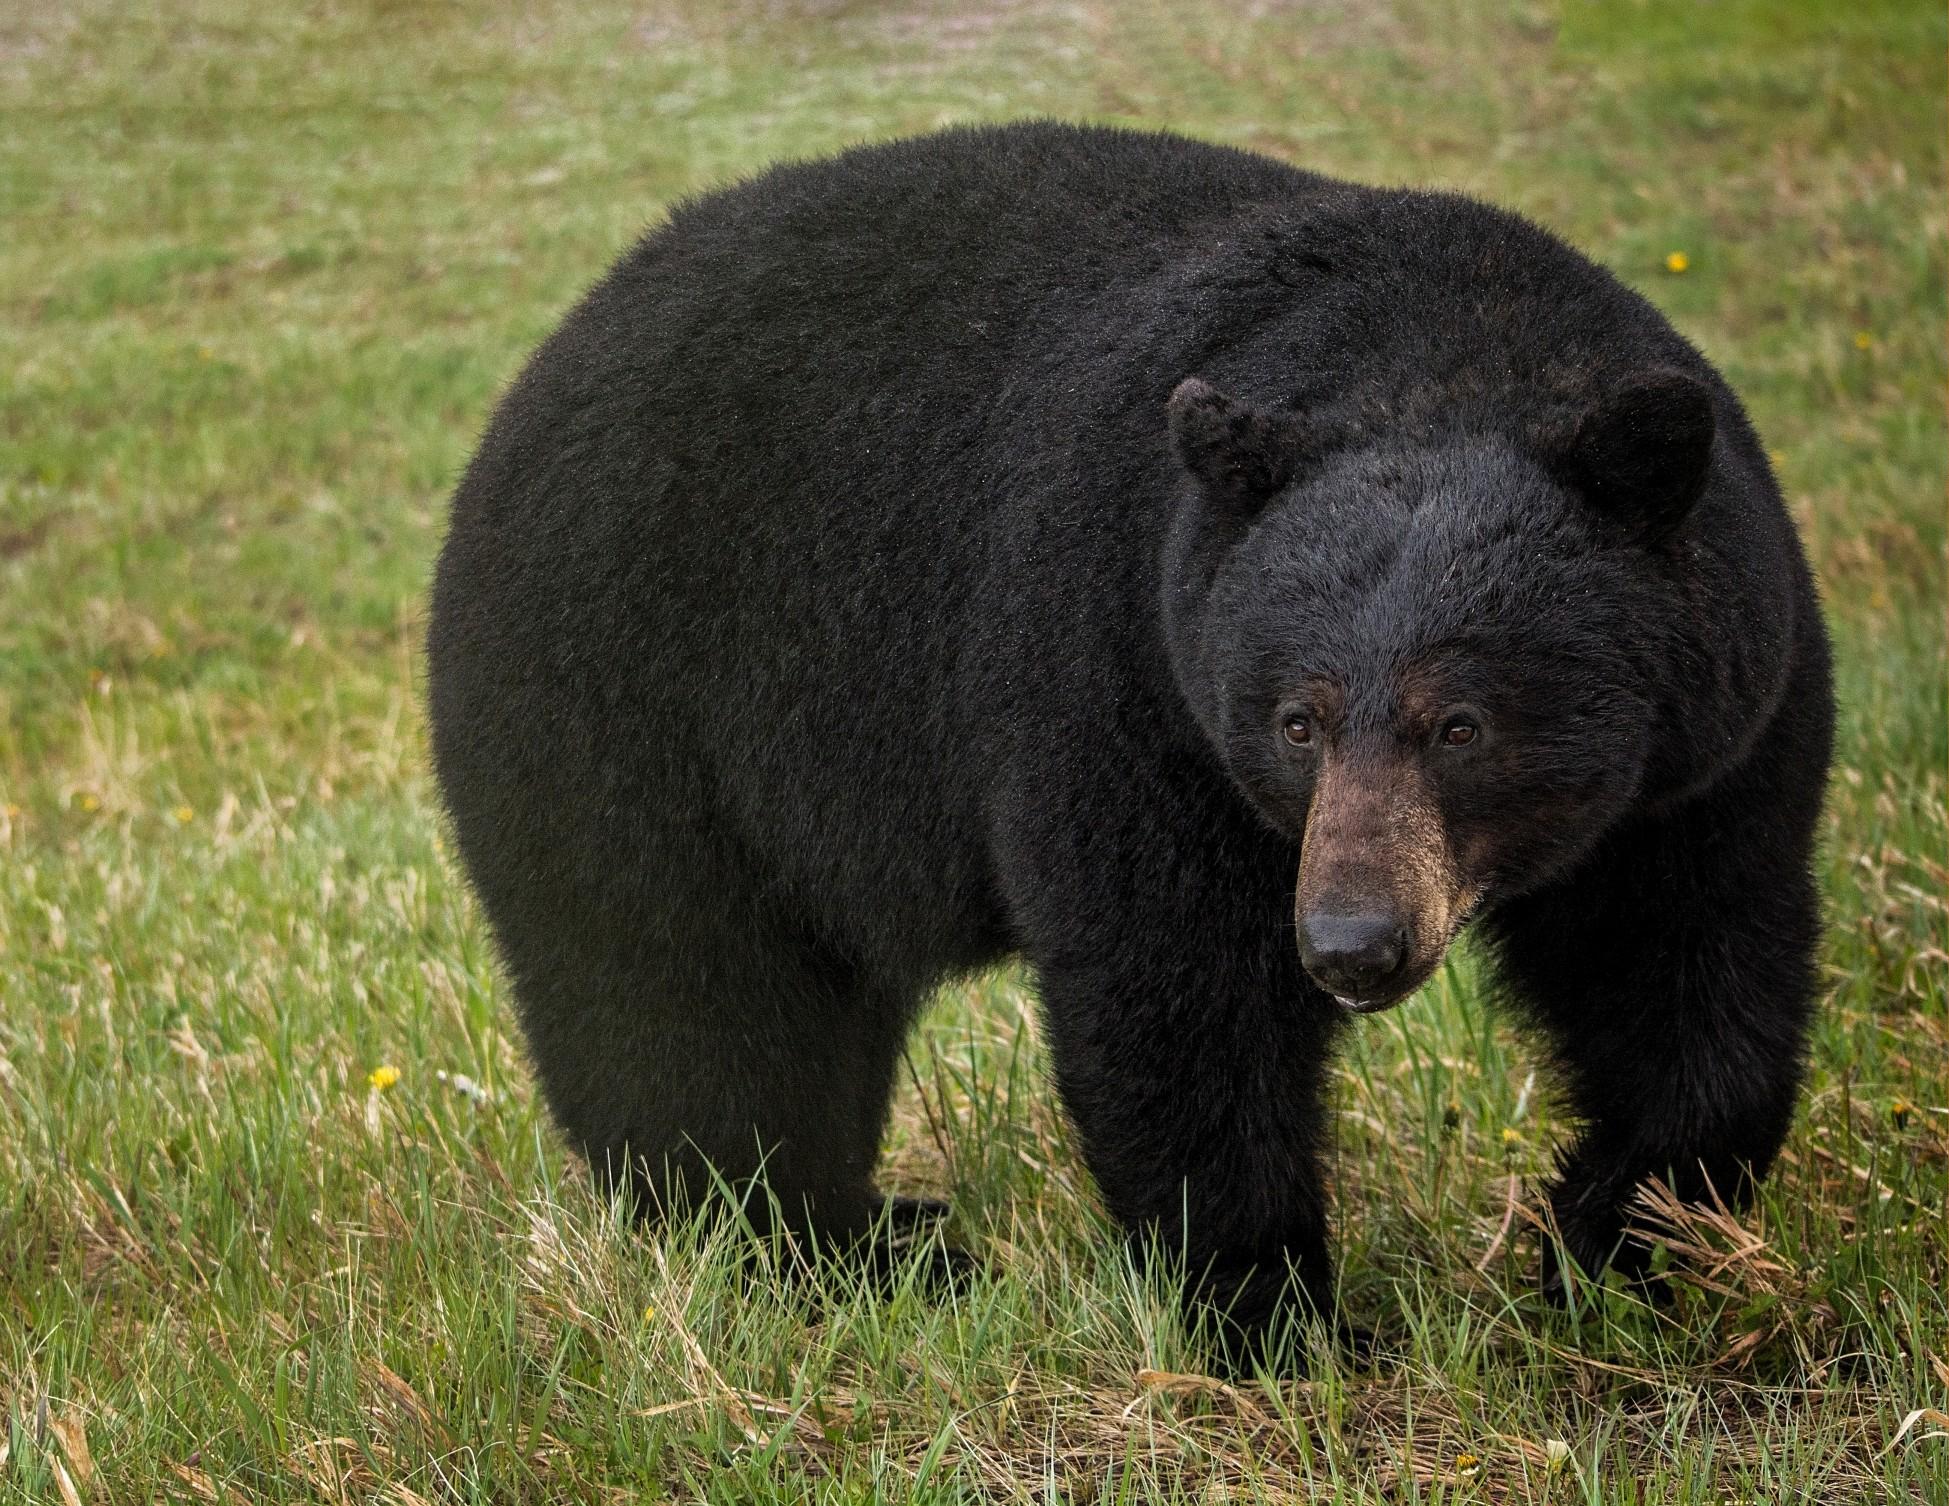 A black bear broke into a Tennessee man’s car and caused significant damage.